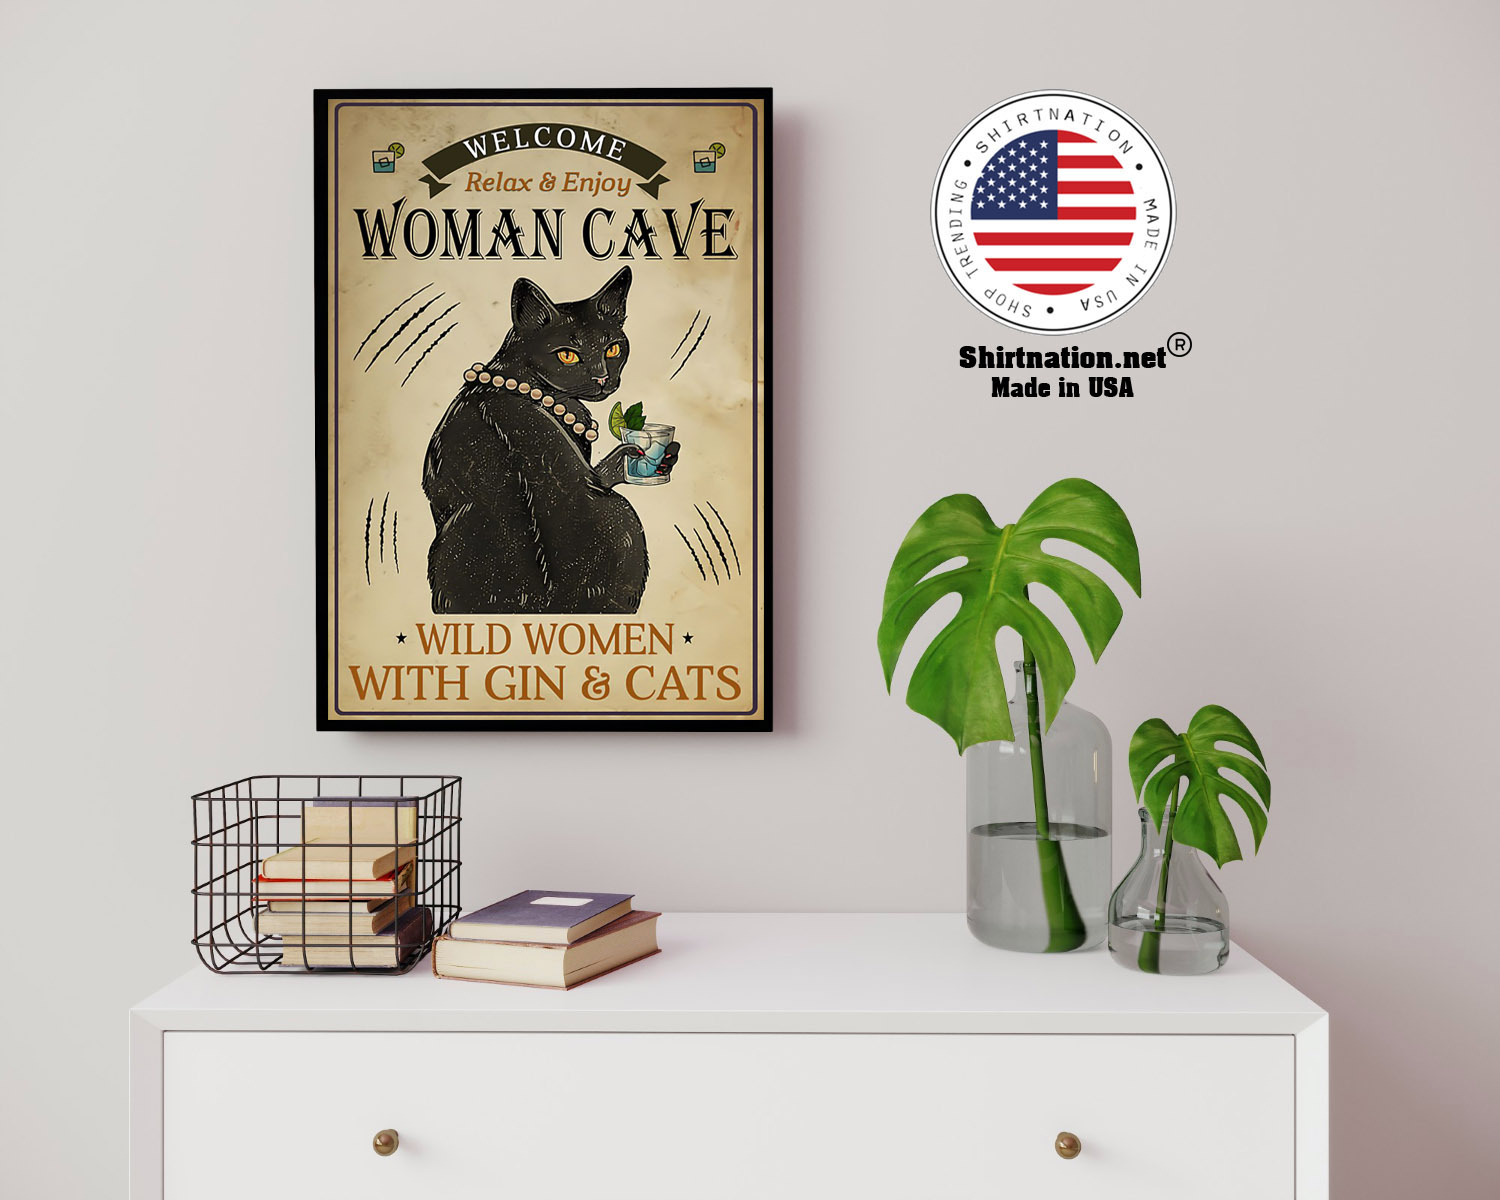 Welcome relax enjoy woman cave will women with gin and cats poster 14